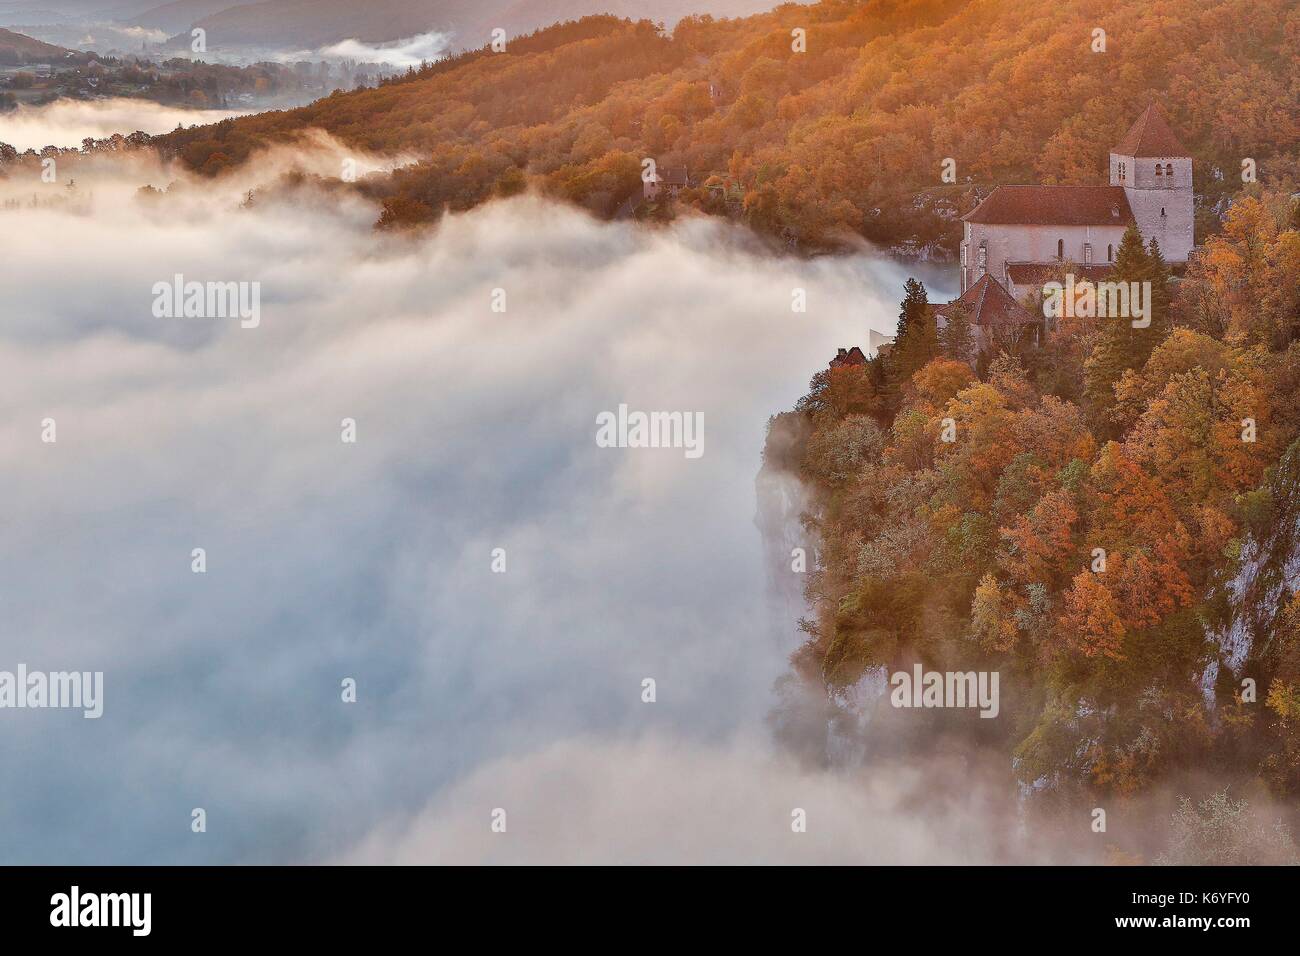 France, Lot, valley of the river Lot, Natural regional park Causses du Quercy, Saint Cirq Lapopie, listed as The most beautiful villages in France, Church of St Cirq emerging from a sea of mist in the valley Stock Photo